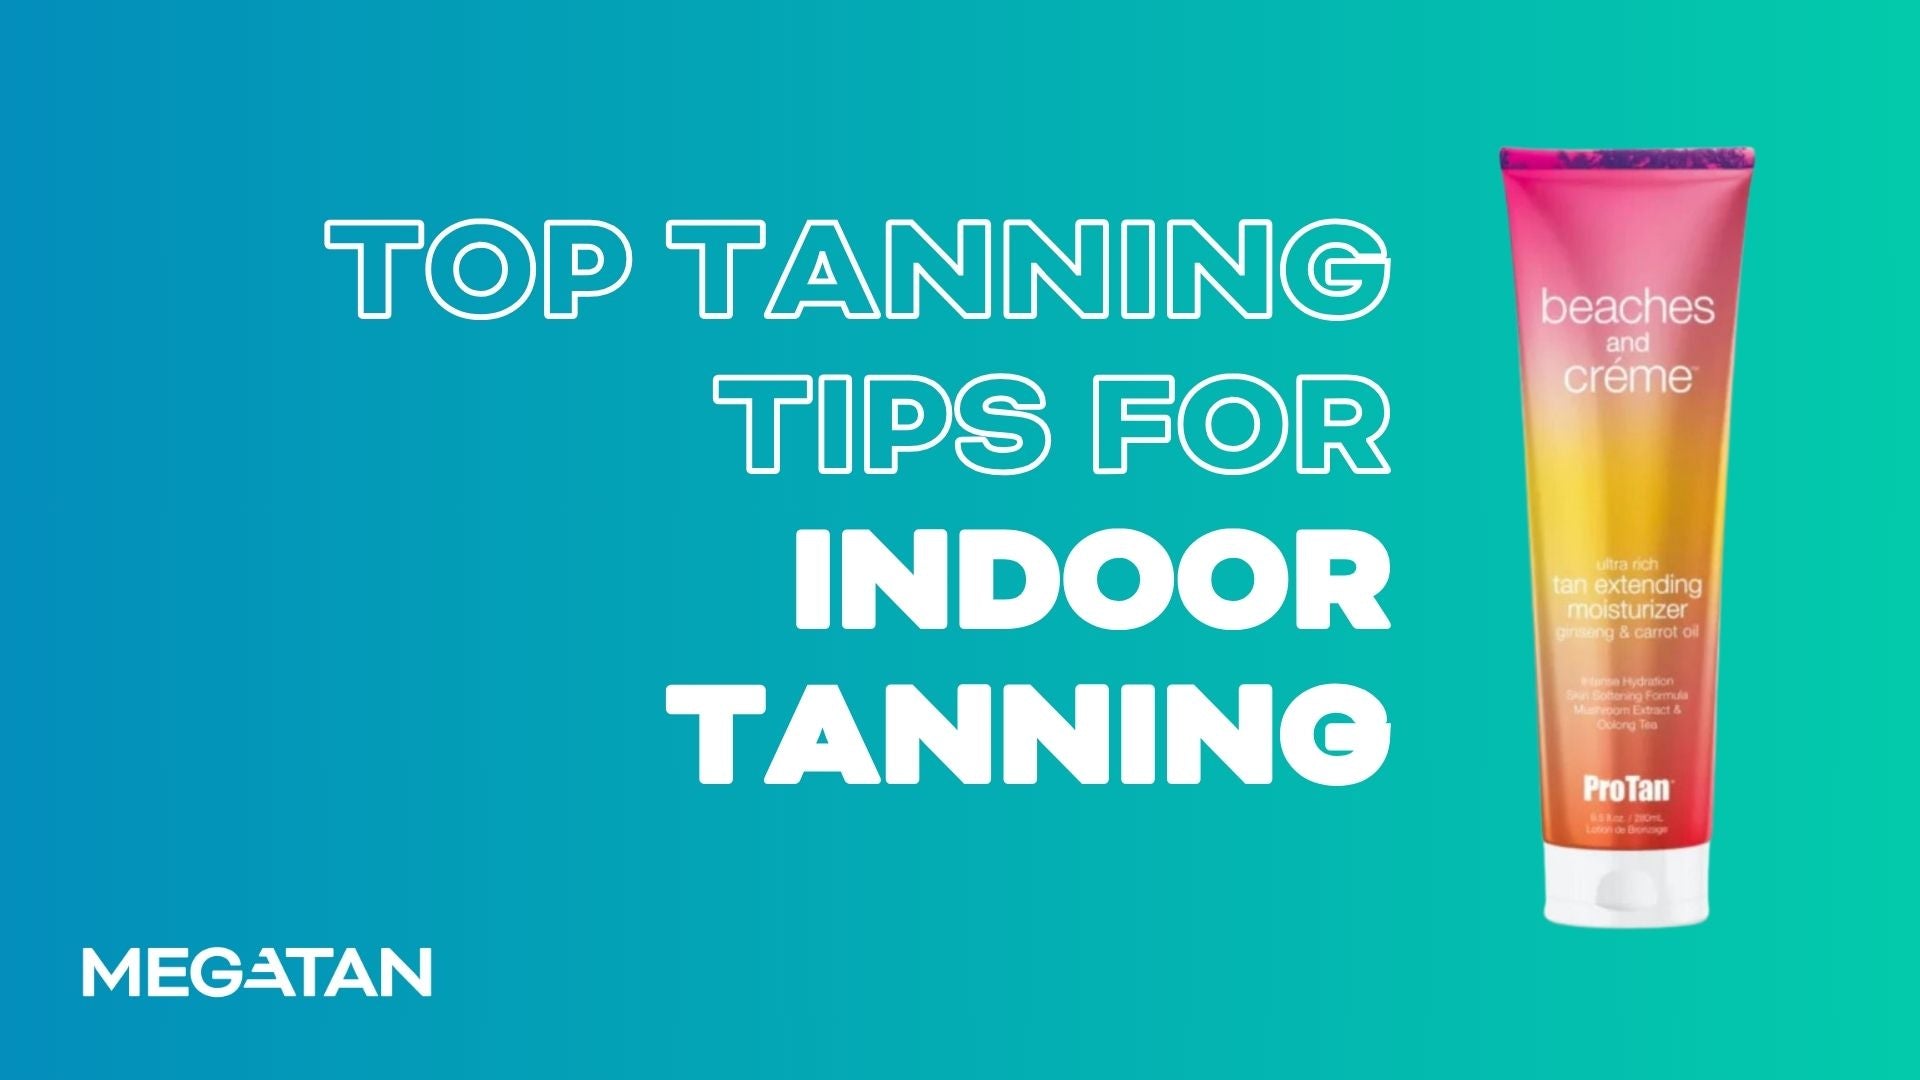 Top Tanning Tips for Indoor Tanning